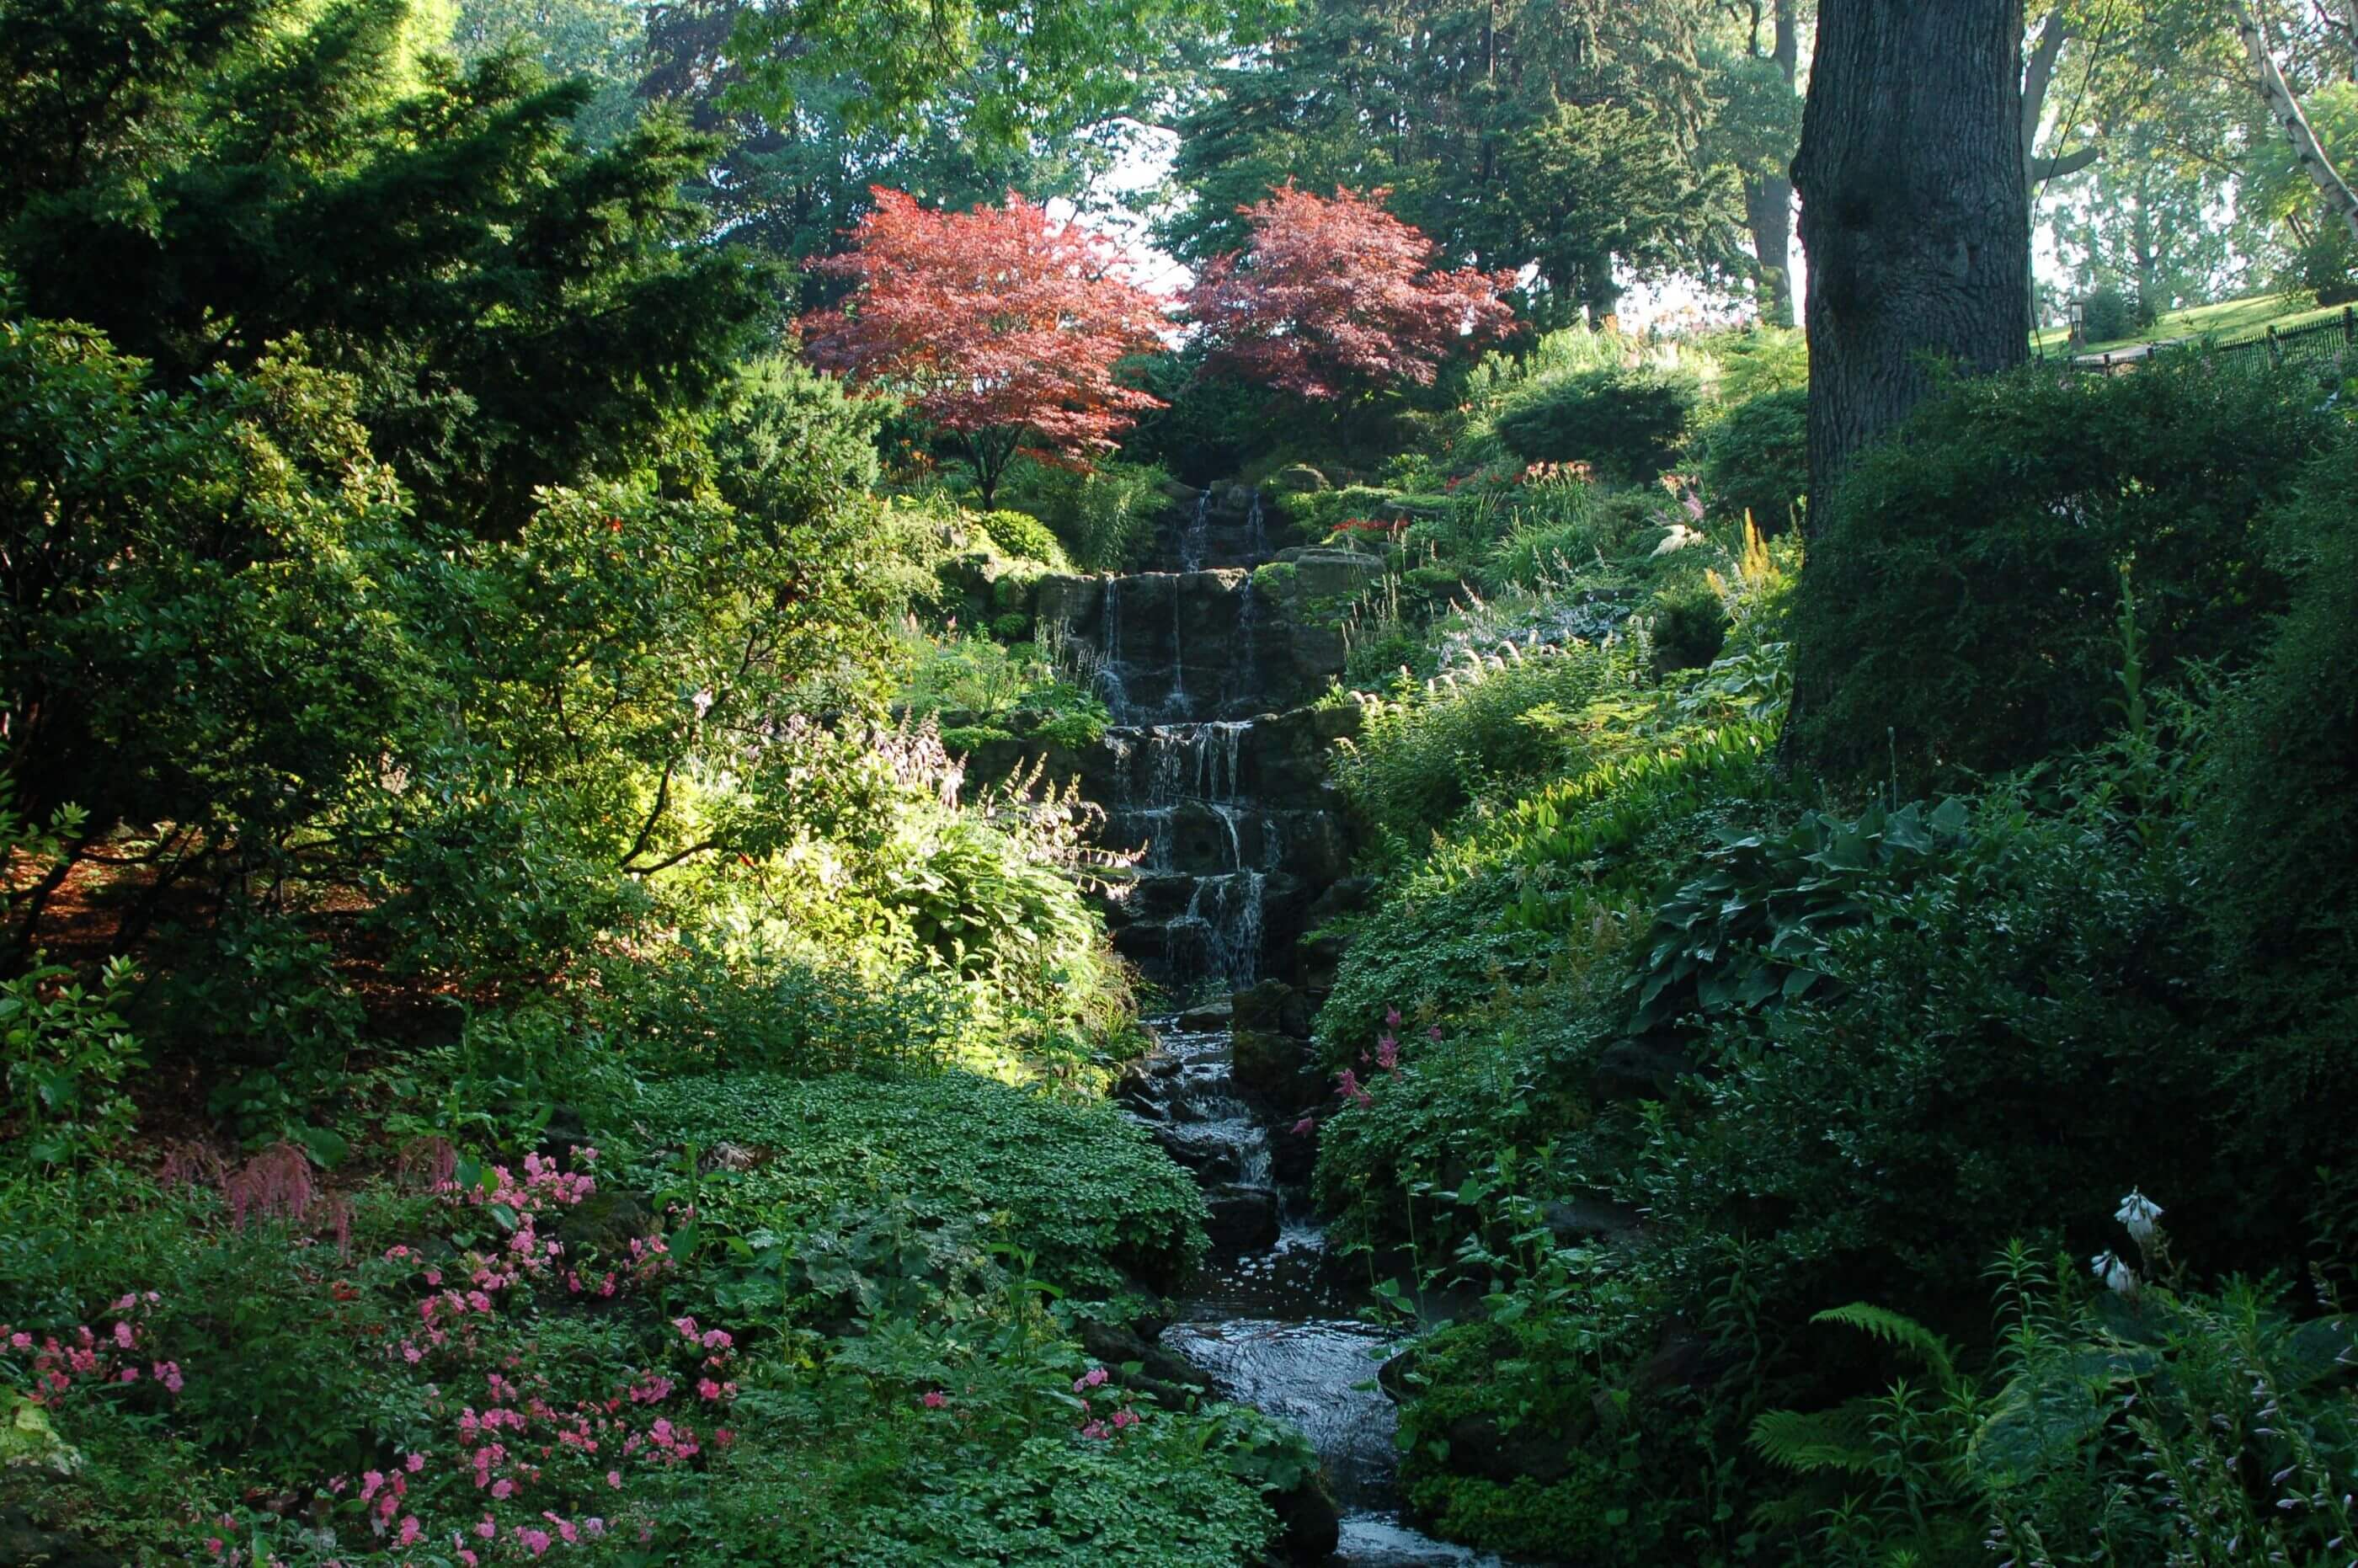 High Park - Landscaped waterfall garden - Image from Wikipedia Commons